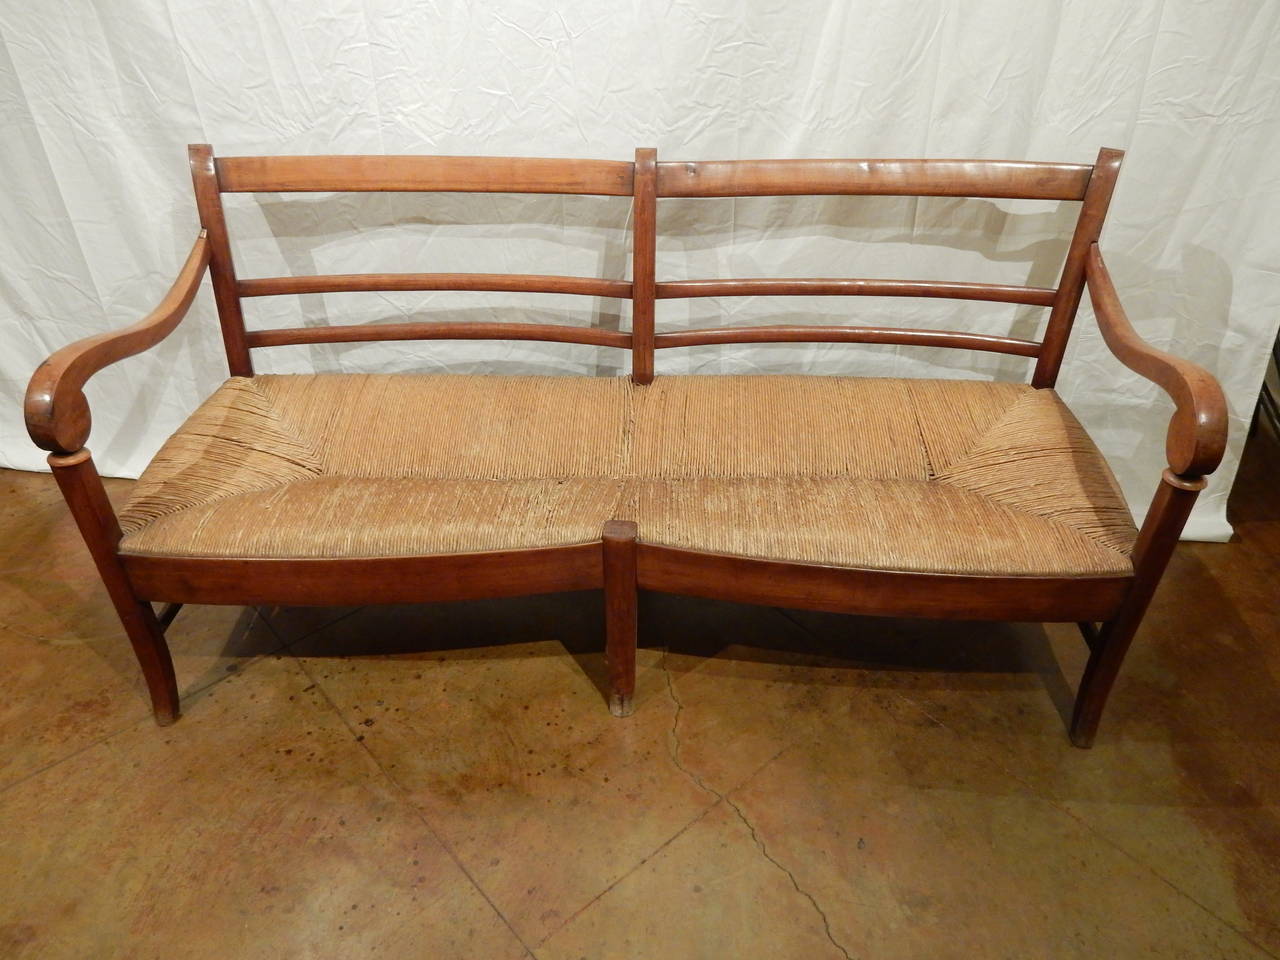 Large French Provincial walnut 19th century banquette with rush seat. Would be wonderful sofa with large cushion and pillows. Has enough depth to be very comfortable.